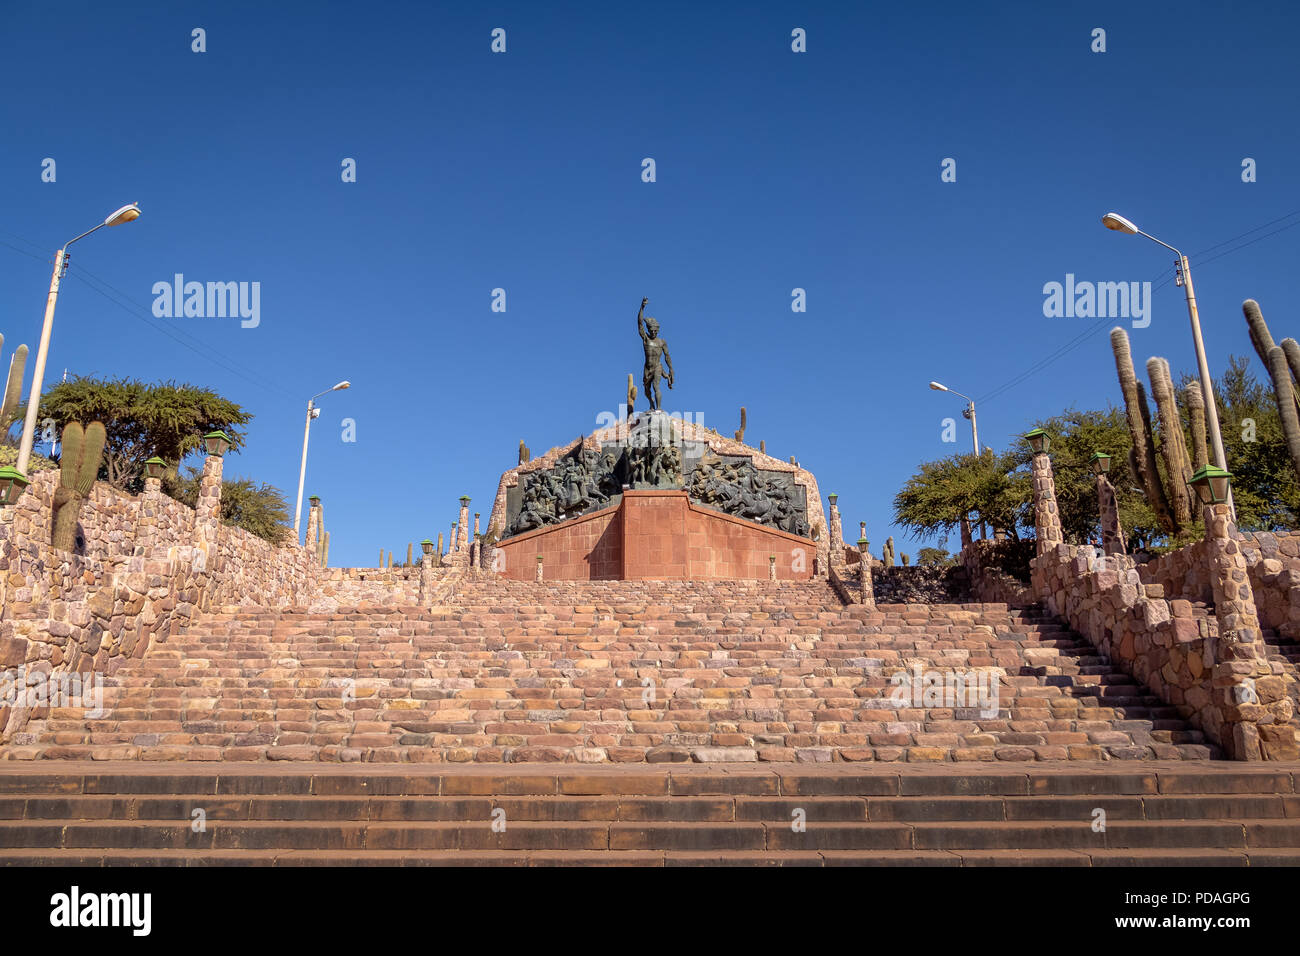 Heroes of the Independence Monument - Humahuaca, Jujuy, Argentina Stock Photo